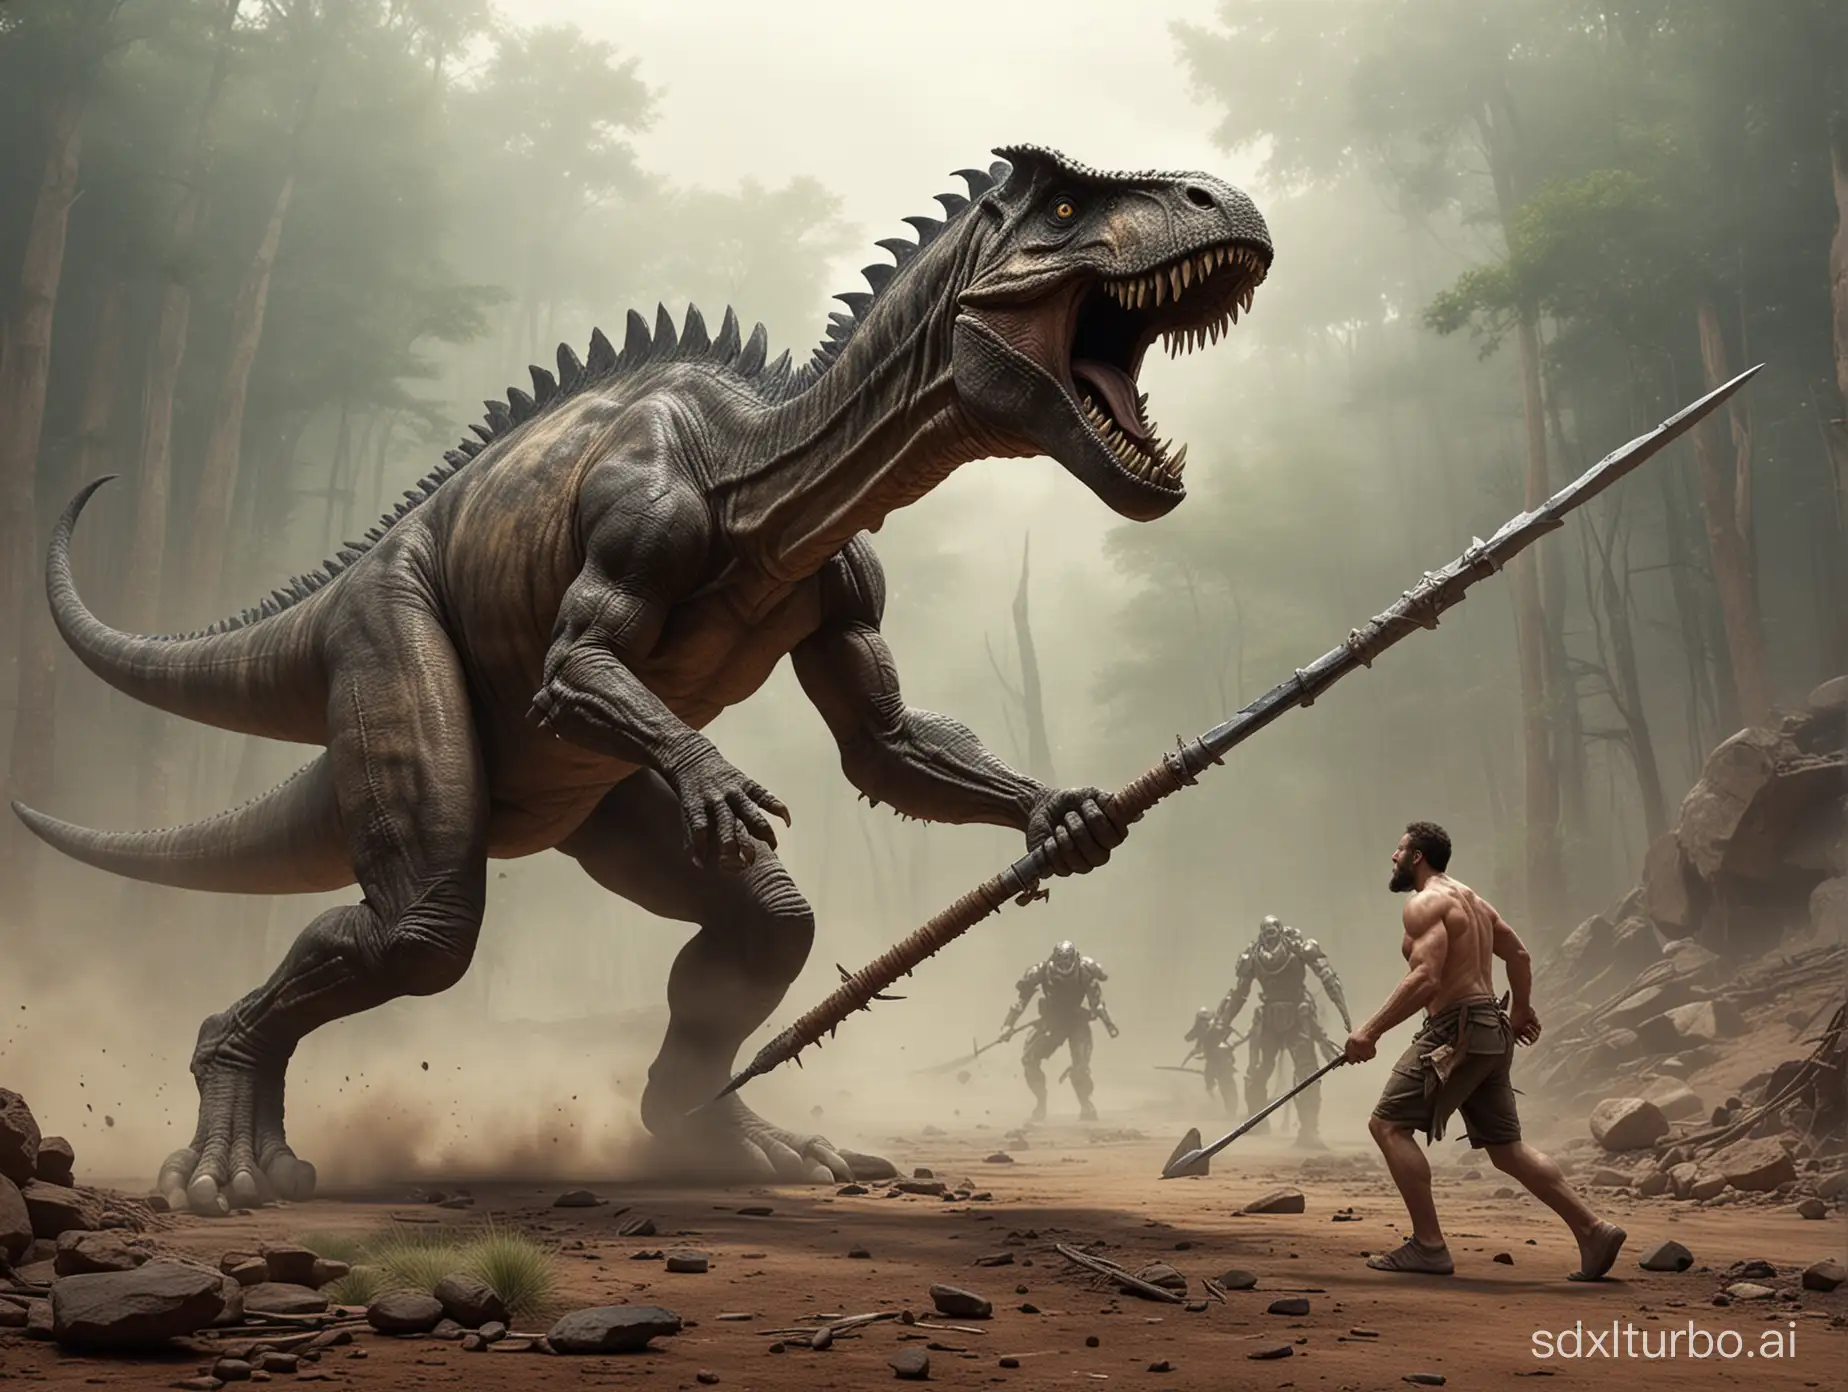 A primitive man holding a steel spear, chasing after a mechanical dinosaur.